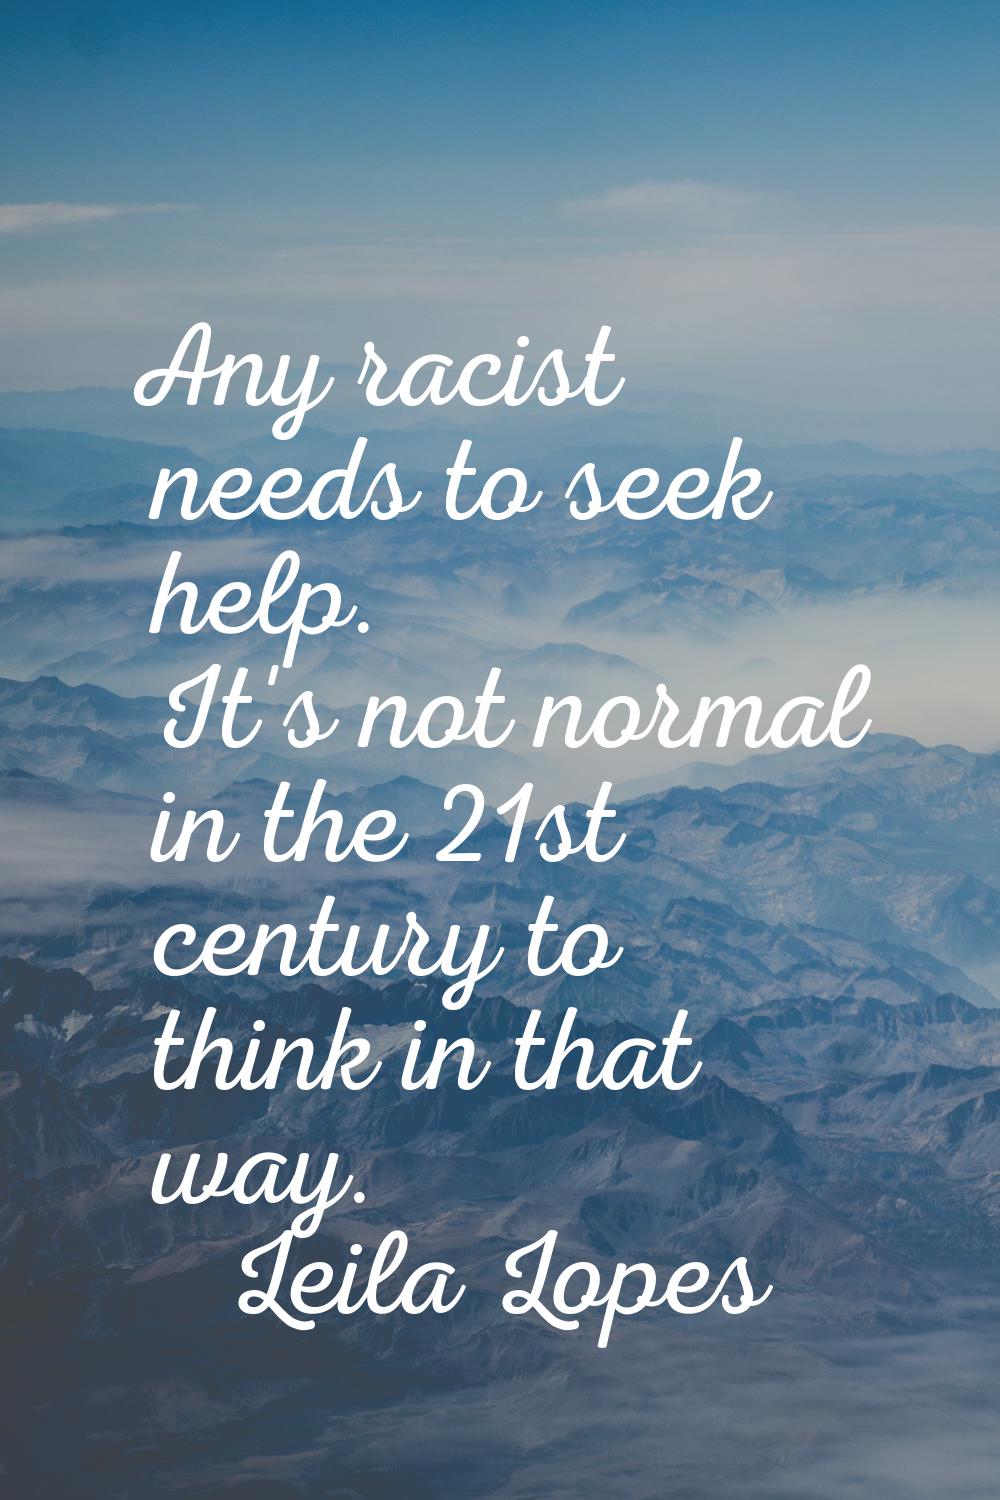 Any racist needs to seek help. It's not normal in the 21st century to think in that way.